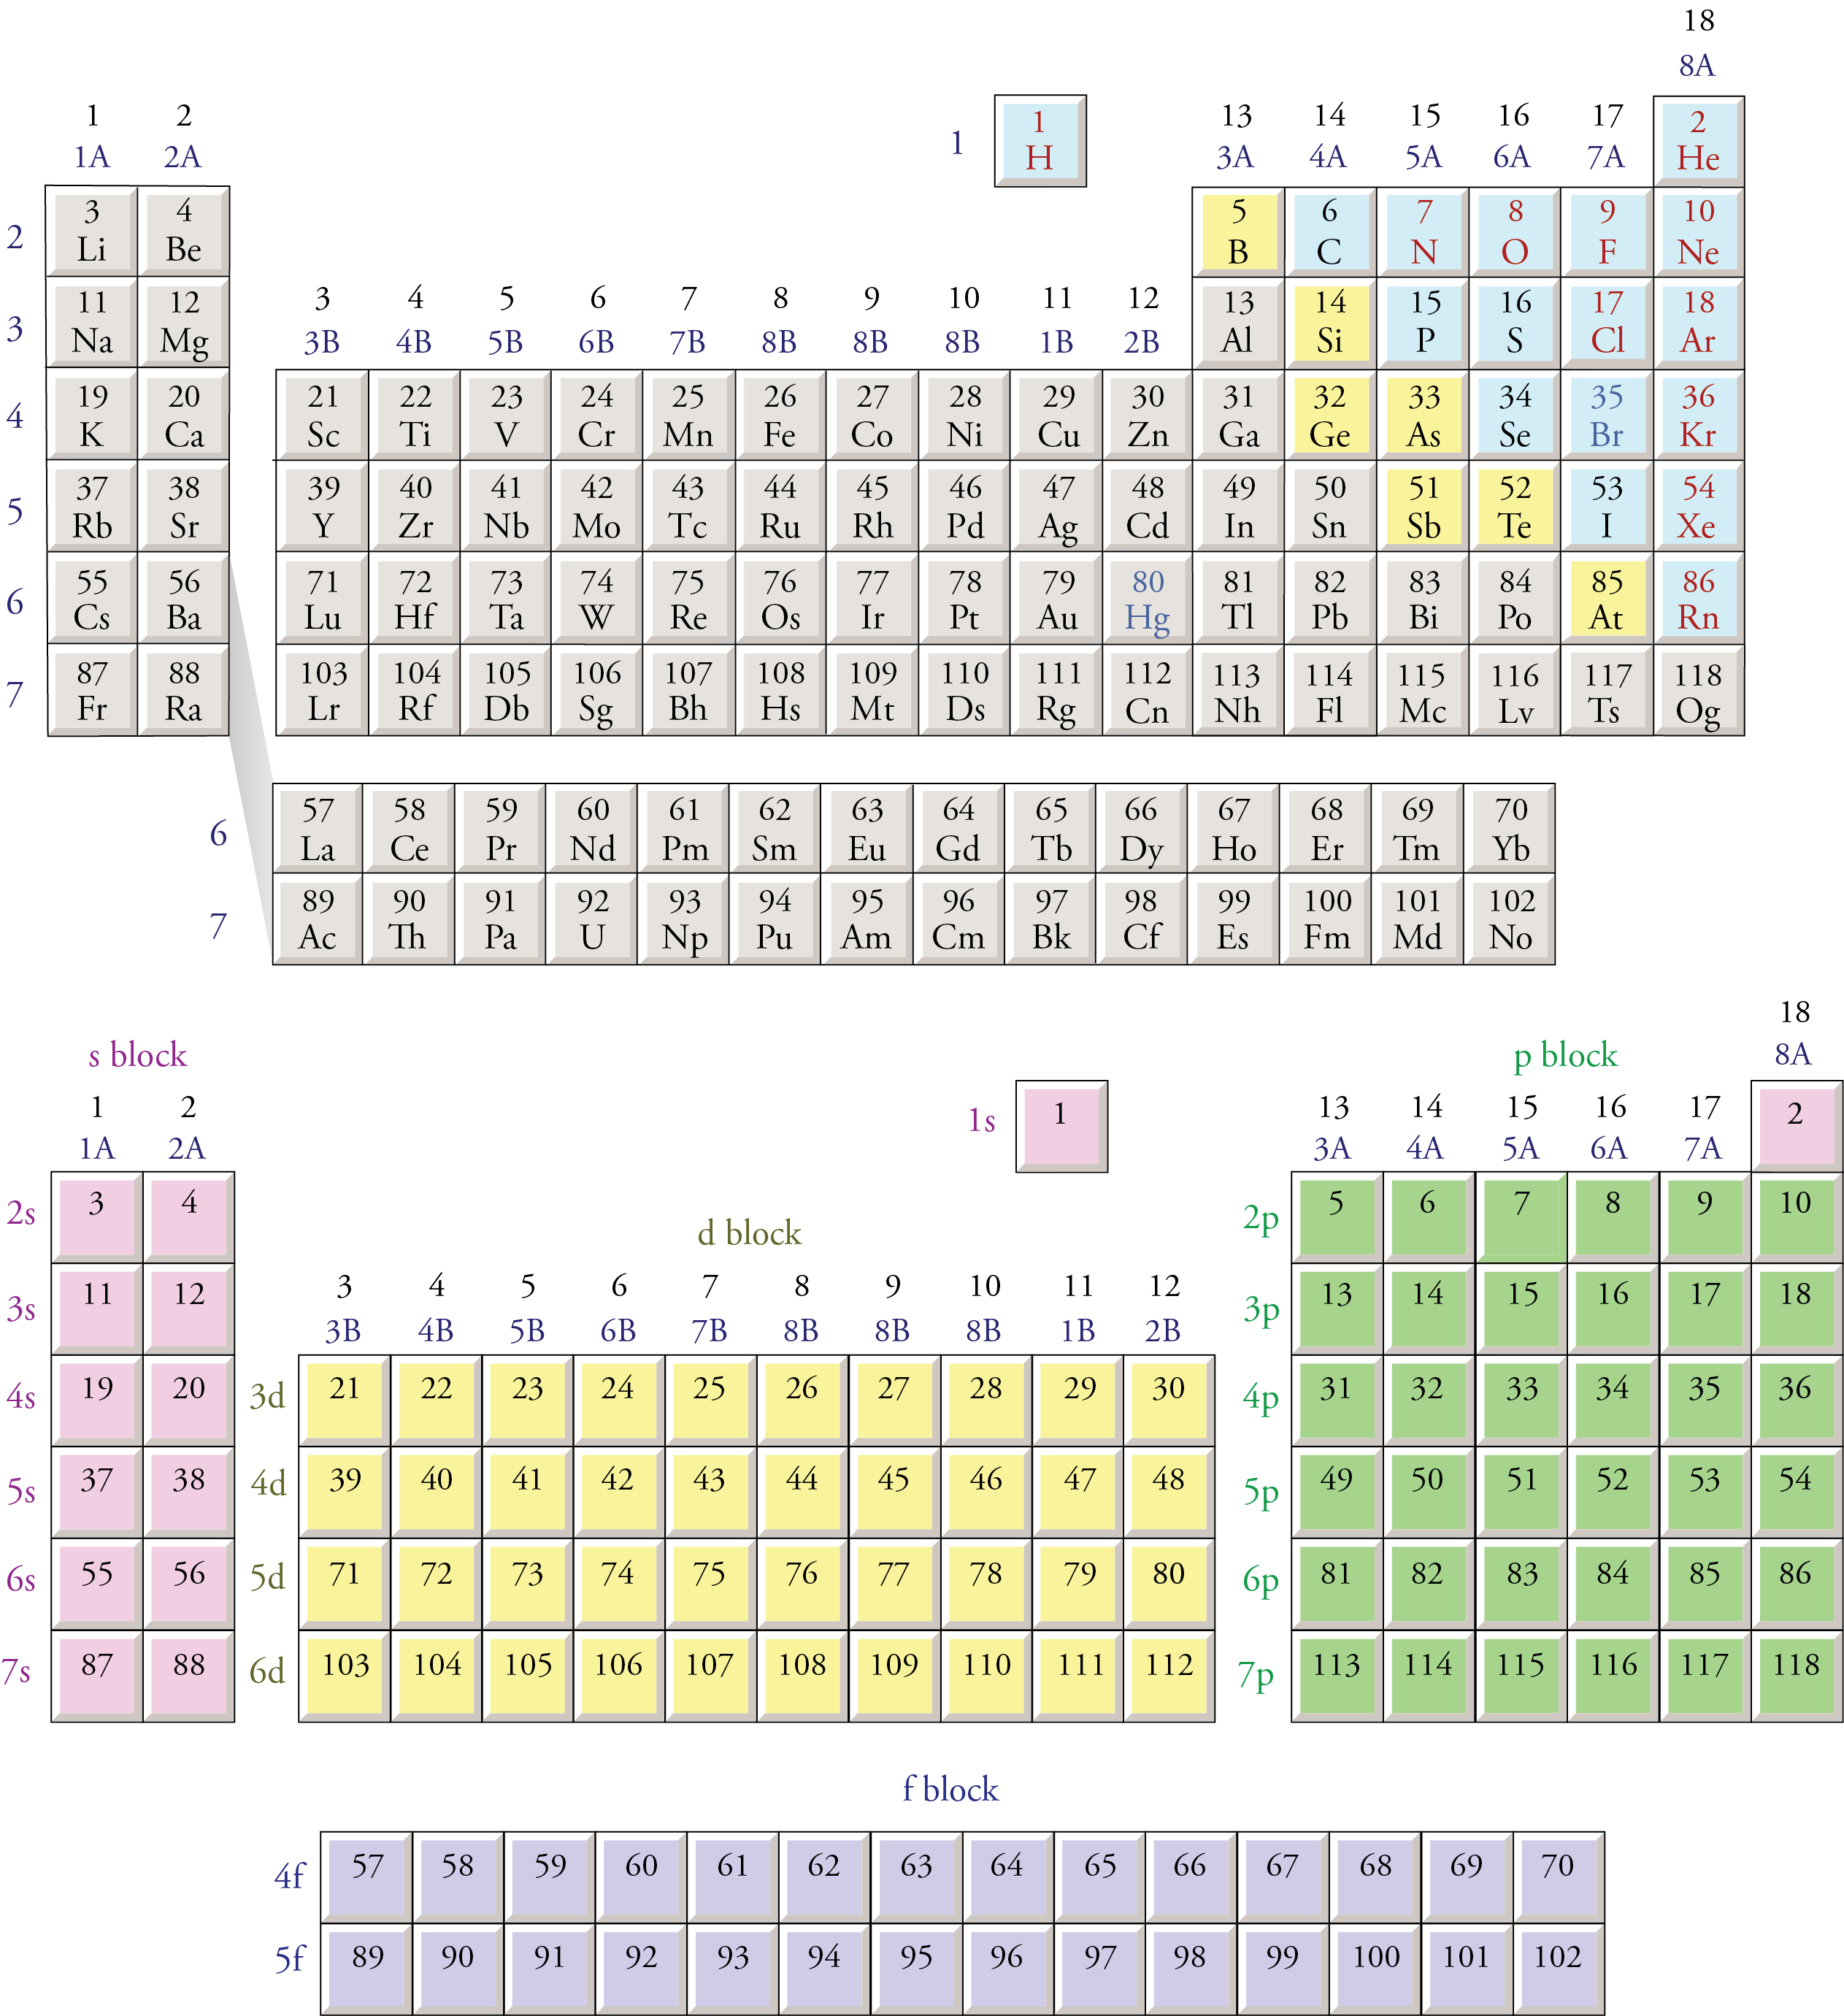 Image of the periodic table showing the s, p, d, and f blocks